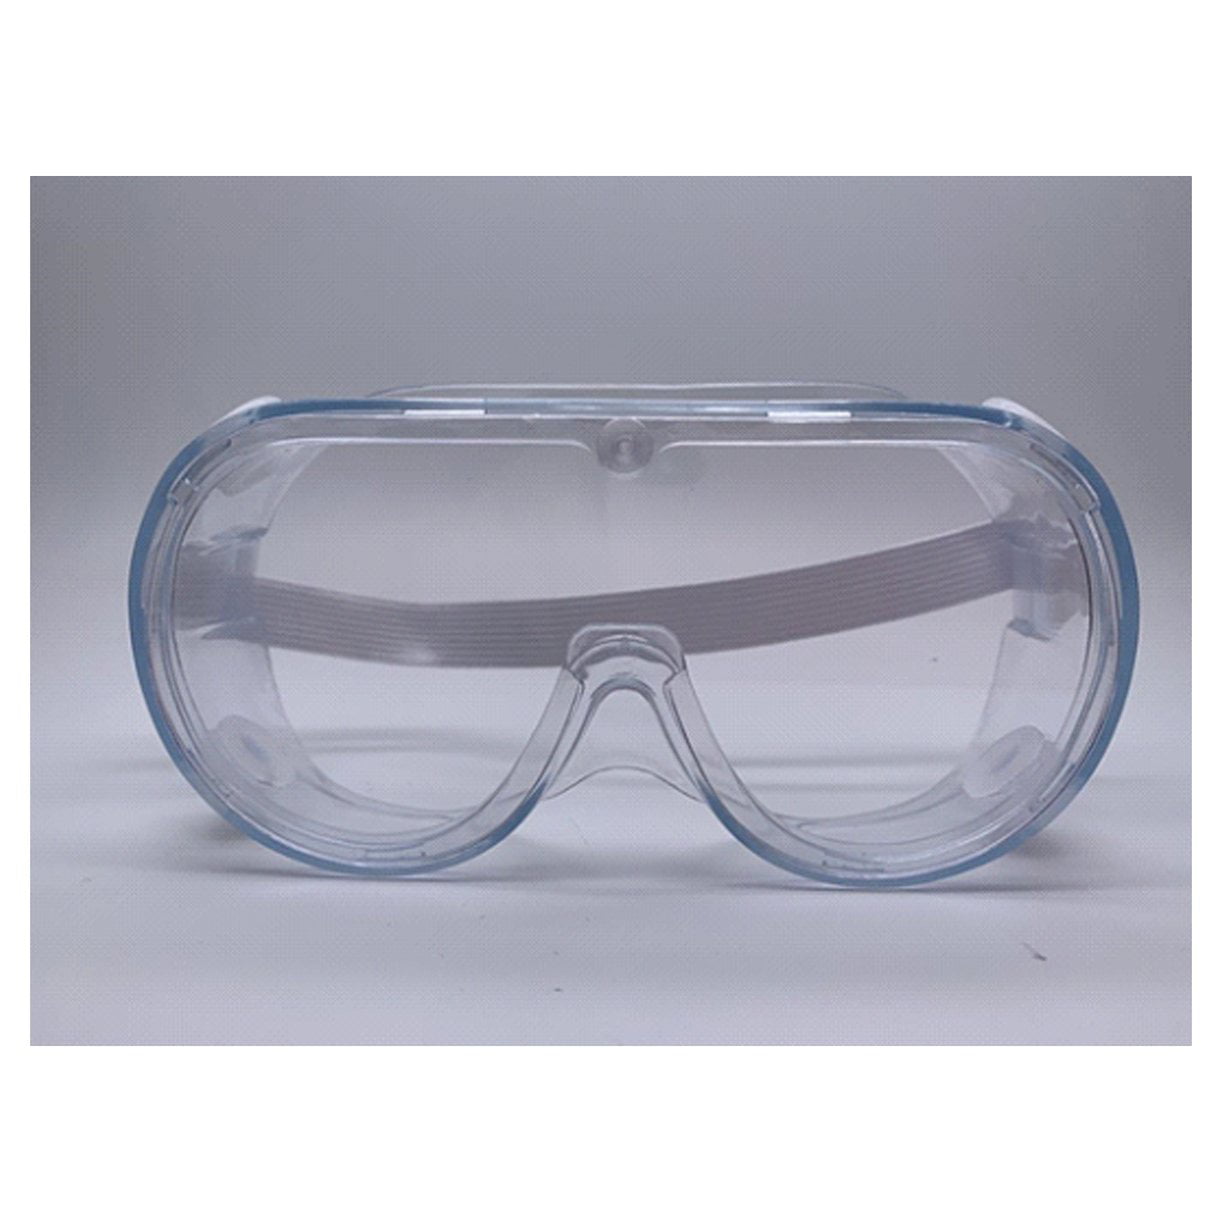 Anti-Fog Anti-Droplets Dustproof Eye Protection Glasses /& Protective Goggles Unisex Safety Goggles Eye Protection Glasses Perfect for Construction